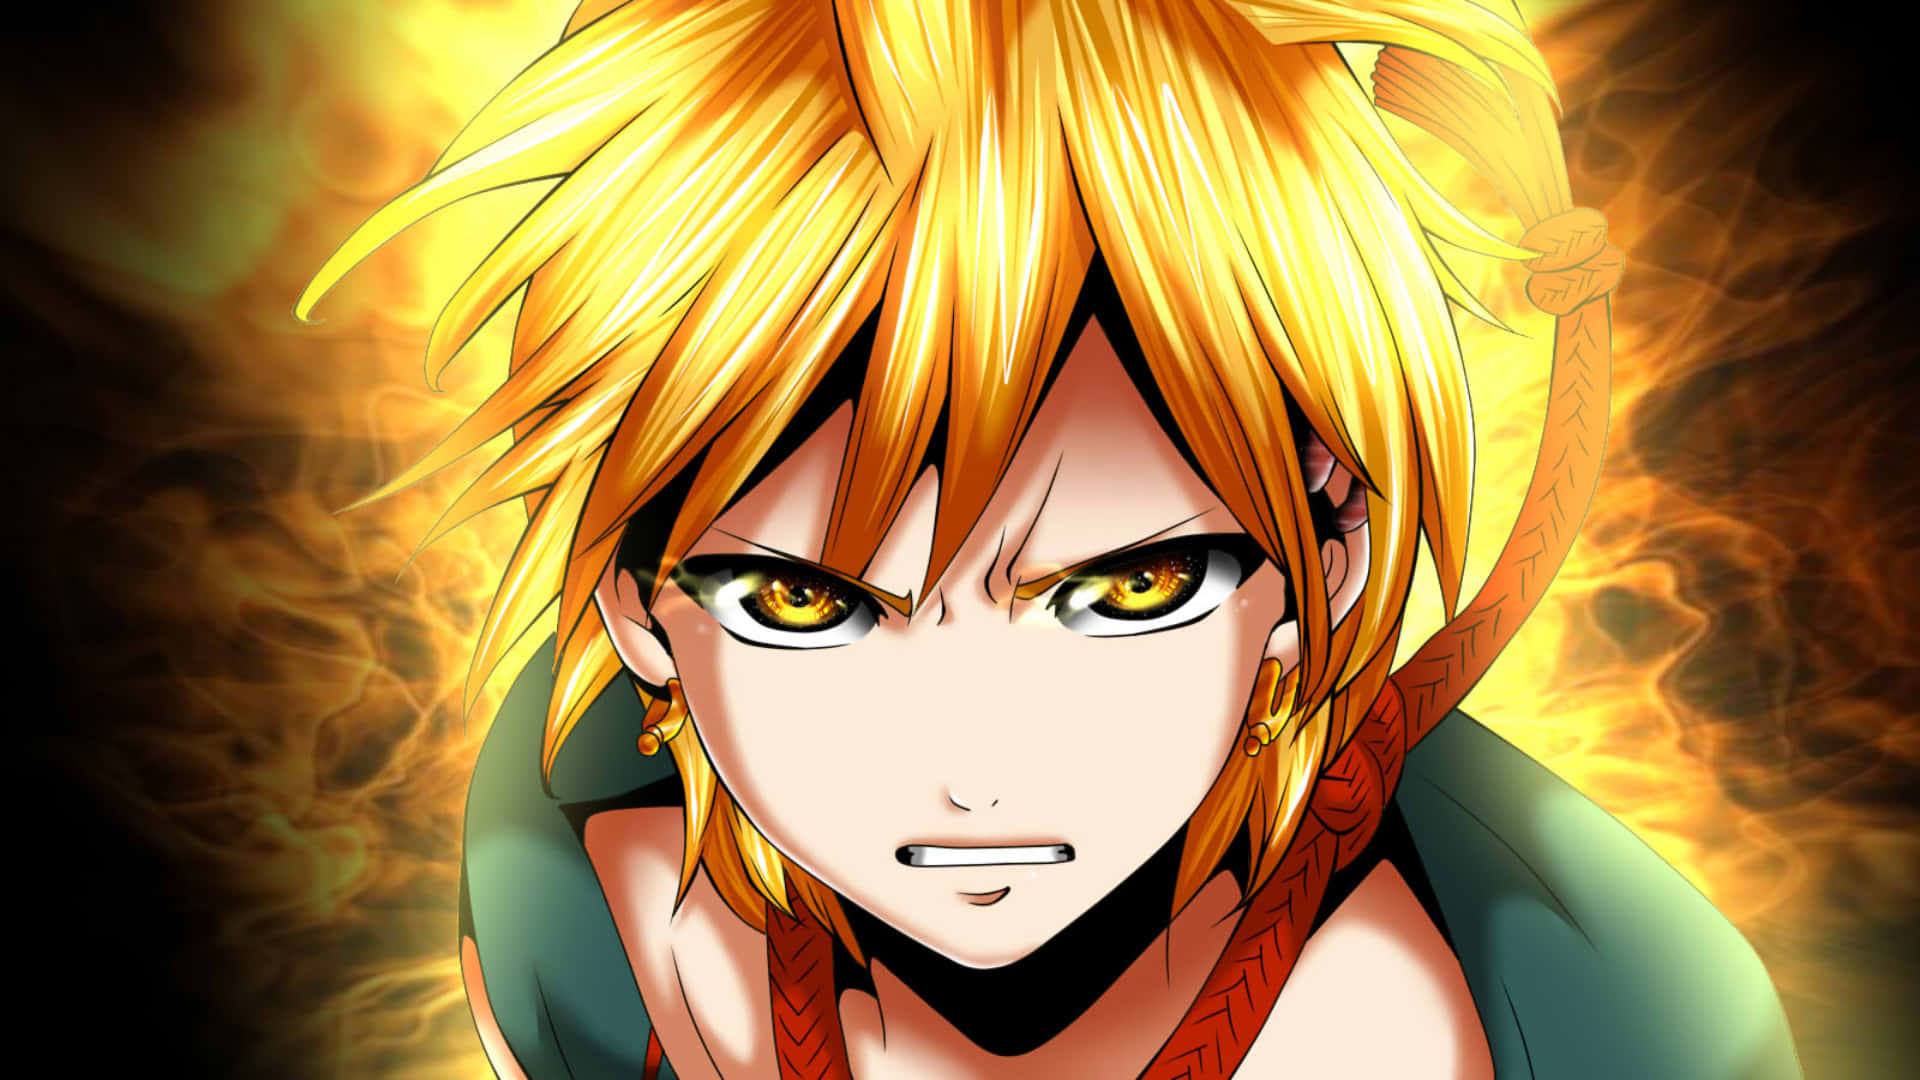 Alibaba Saluja - The Mighty King From The Anime Magi Wallpaper